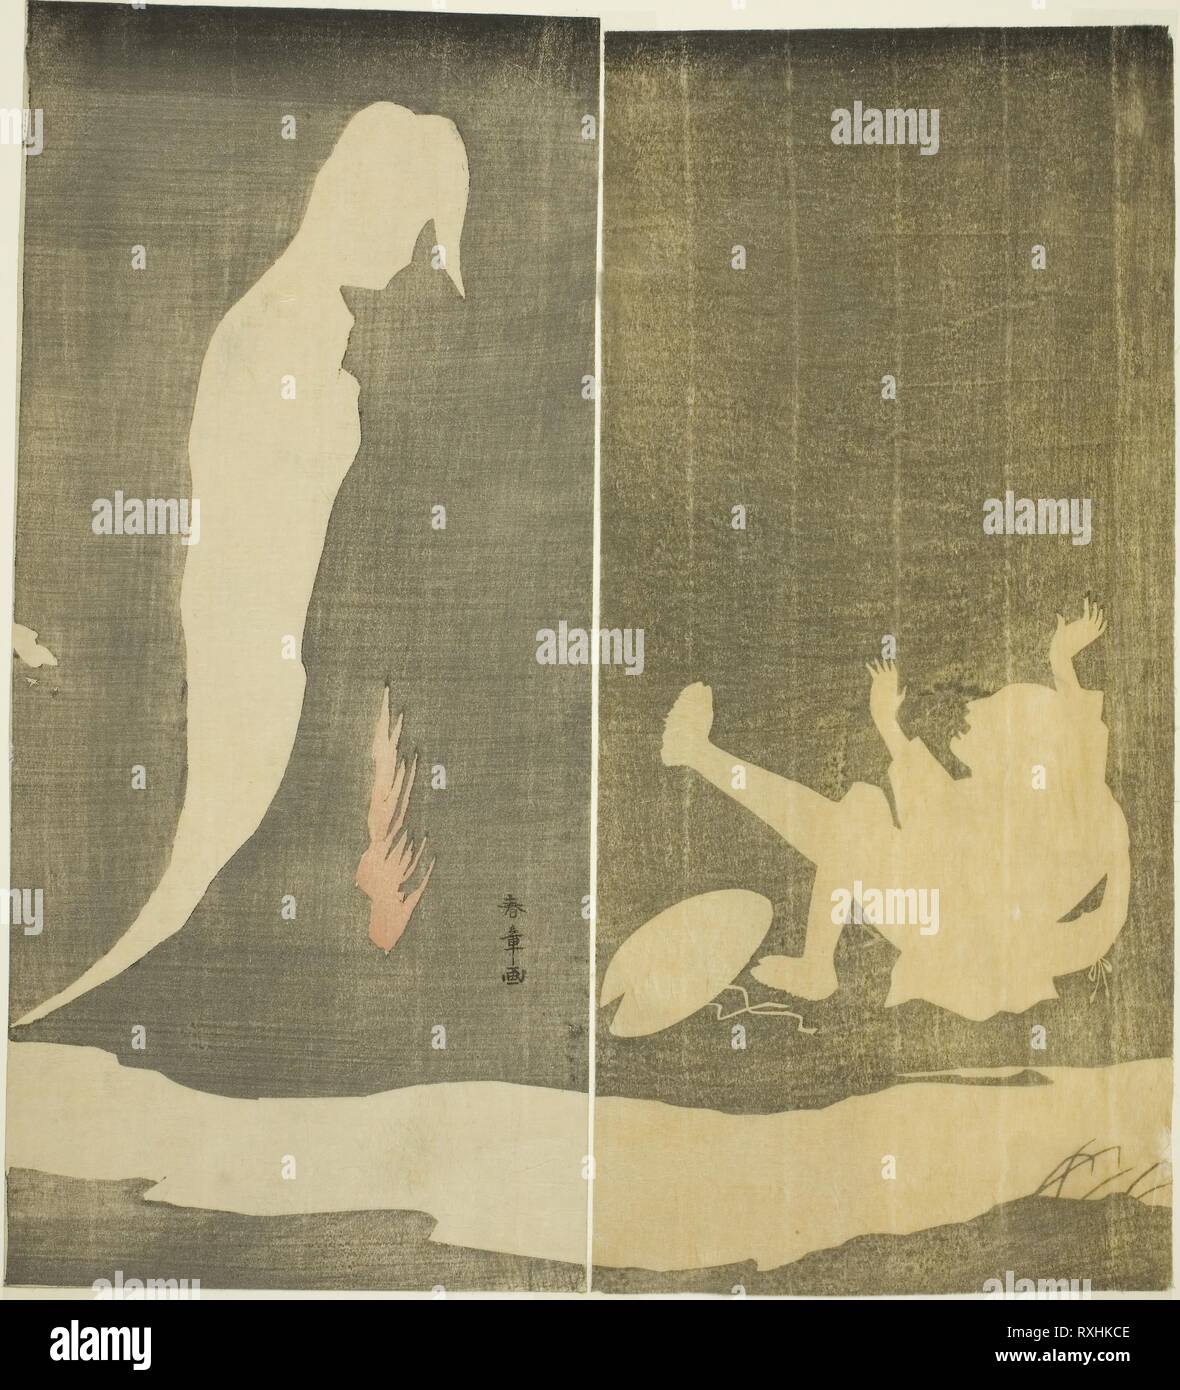 Man Falling Backward, Startled by a Woman's Ghost over a River. Katsukawa Shunsho ?? ??; Japanese, 1726-1792. Date: 1777-1787. Dimensions: Right: 31.5 x 14.2 cm (12 3/8 x 5 9/16 in.); left: 31.7 x 14.2 cm (12 1/2 x 5 9/16 in.). Color woodblock print; hosoban diptych. Origin: Japan. Museum: The Chicago Art Institute. Stock Photo